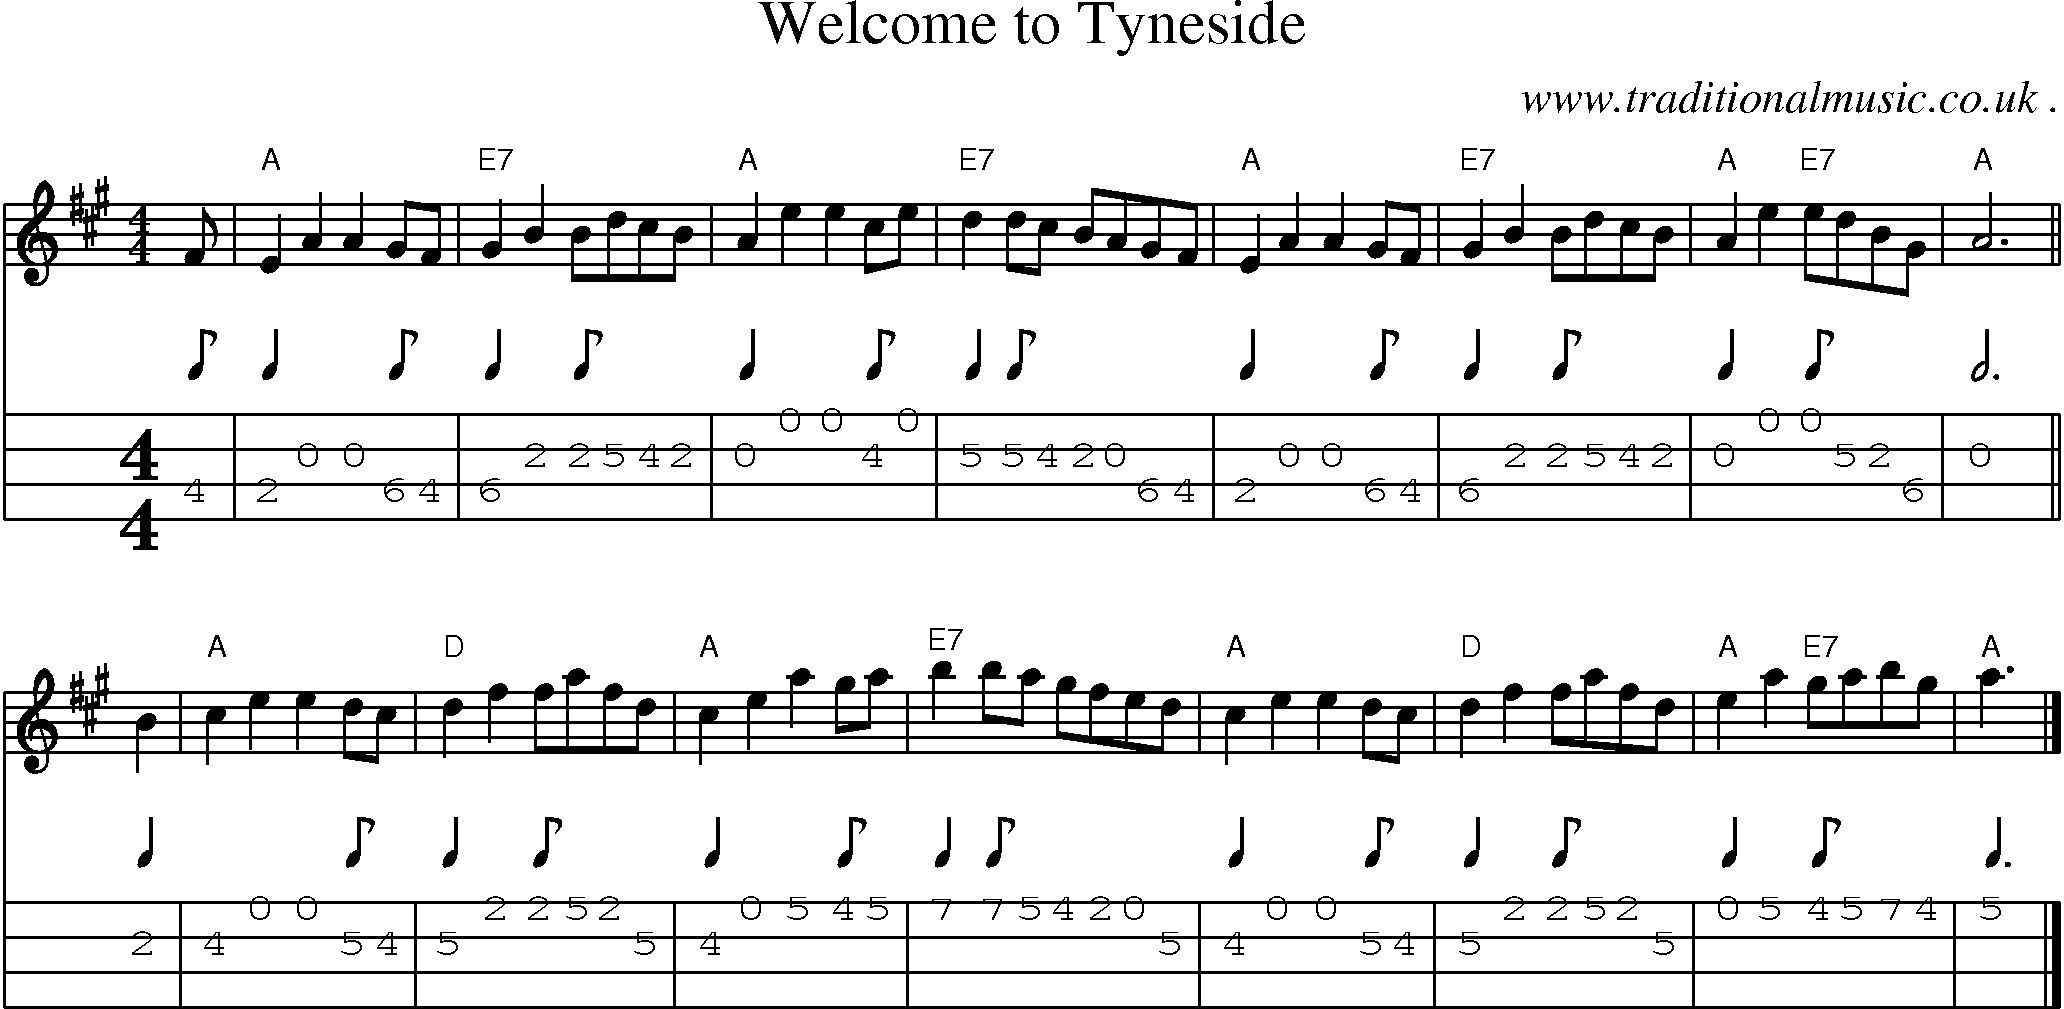 Sheet-music  score, Chords and Mandolin Tabs for Welcome To Tyneside